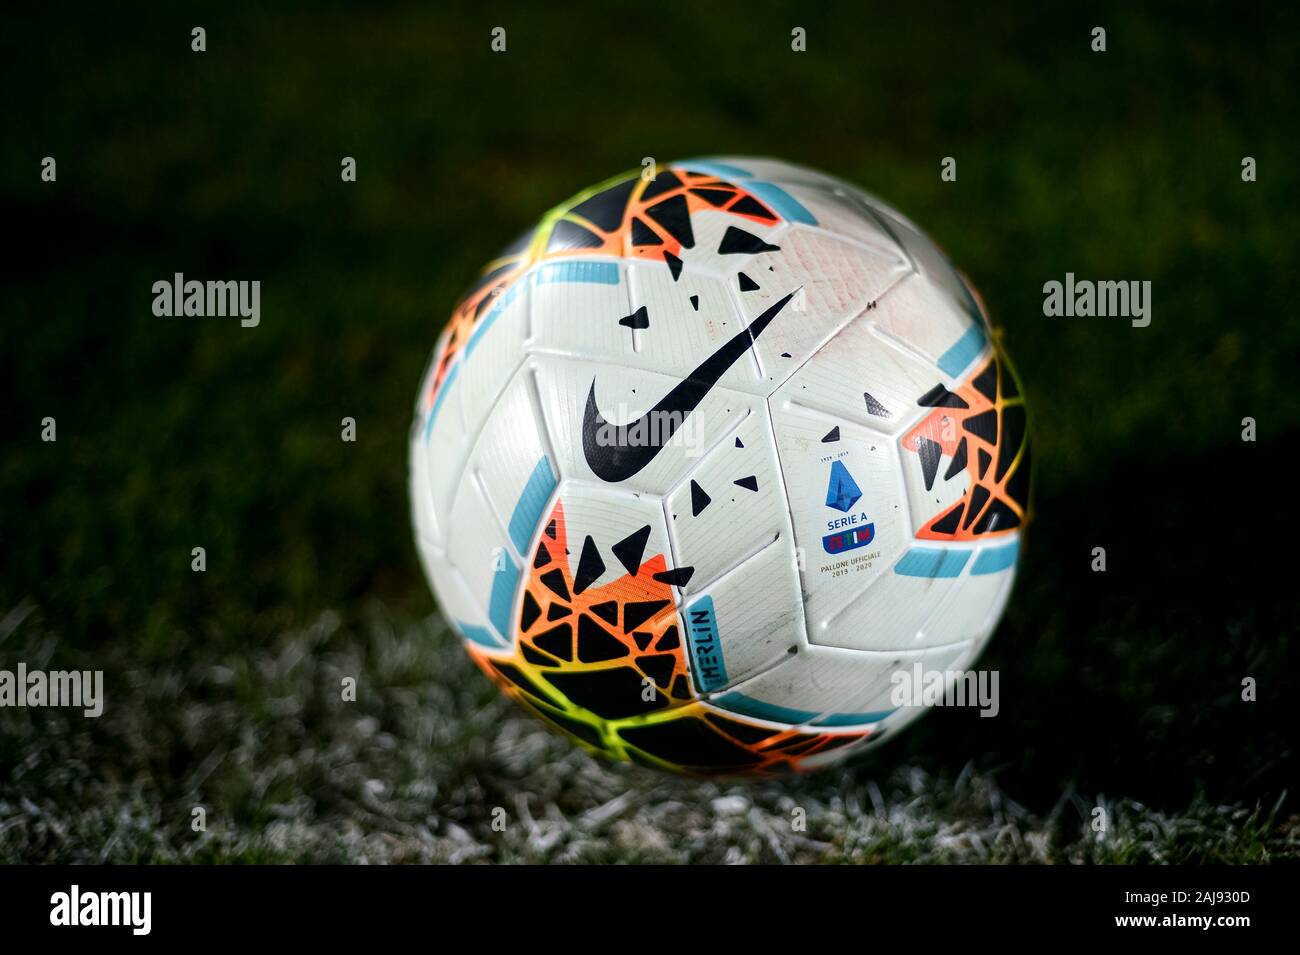 Alessandria, Italy. 25 July, 2019: The official Serie A match ball Nike  Merlin 2 is pictured during the UEFA Europa League second qualifying round  football match between Torino FC and Debrecen VSC.